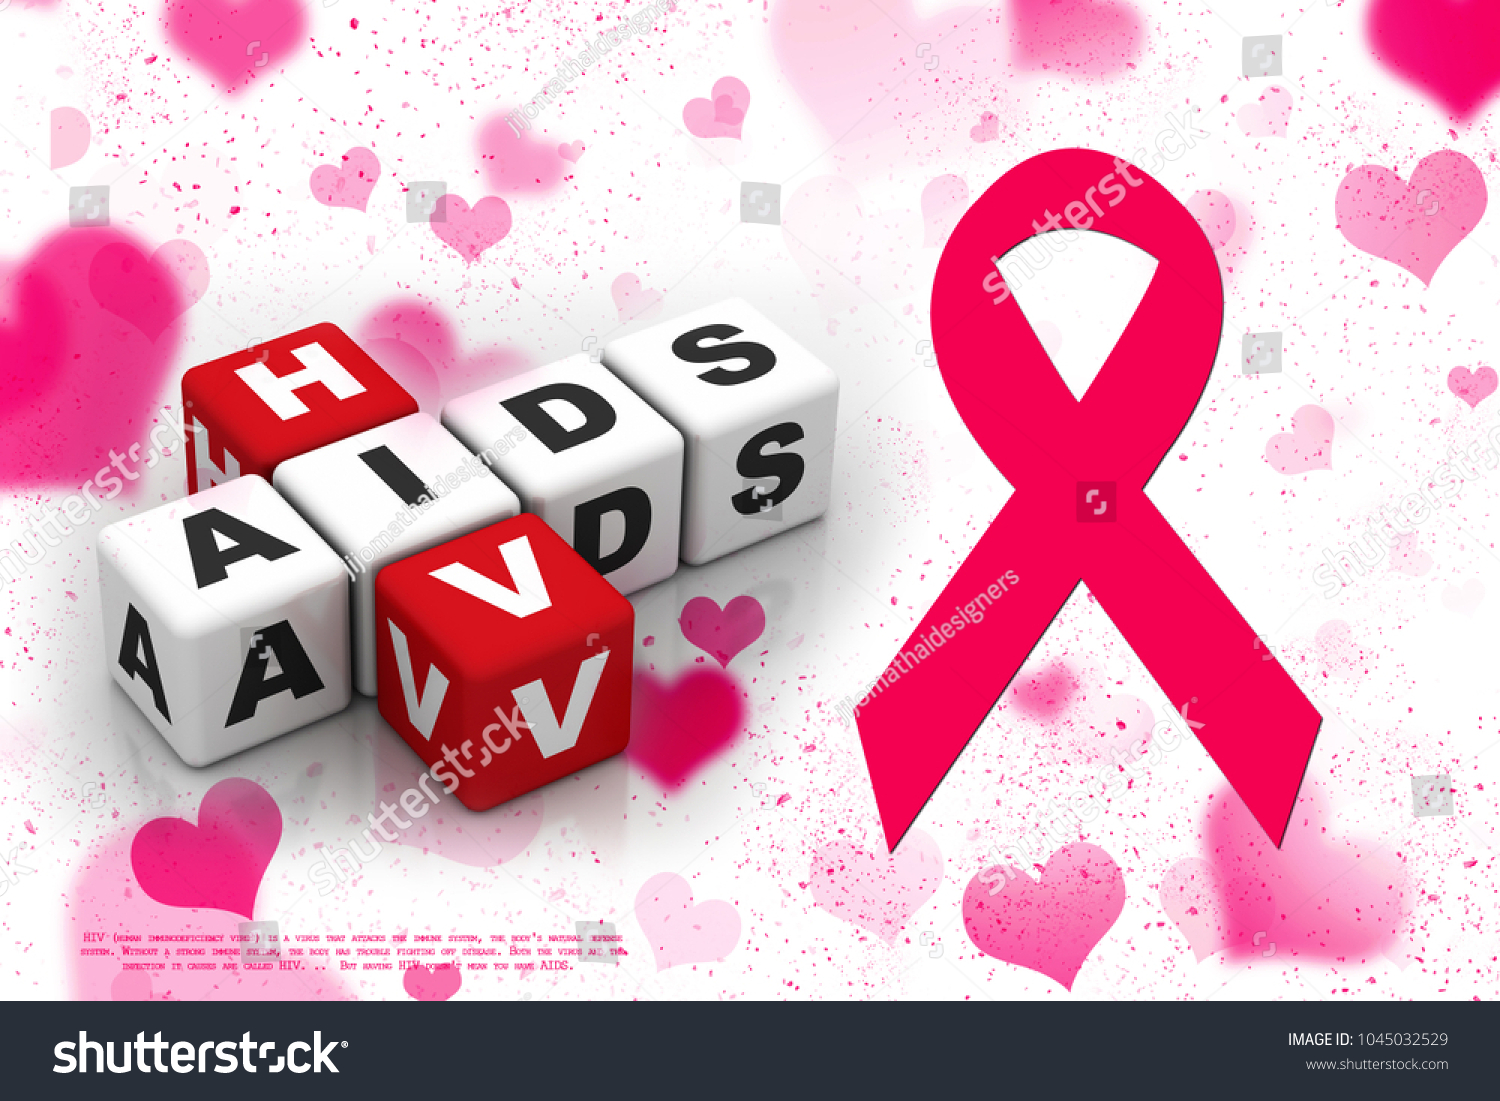 3d Rendering Hiv Aids Crossword Royalty Free Stock Image